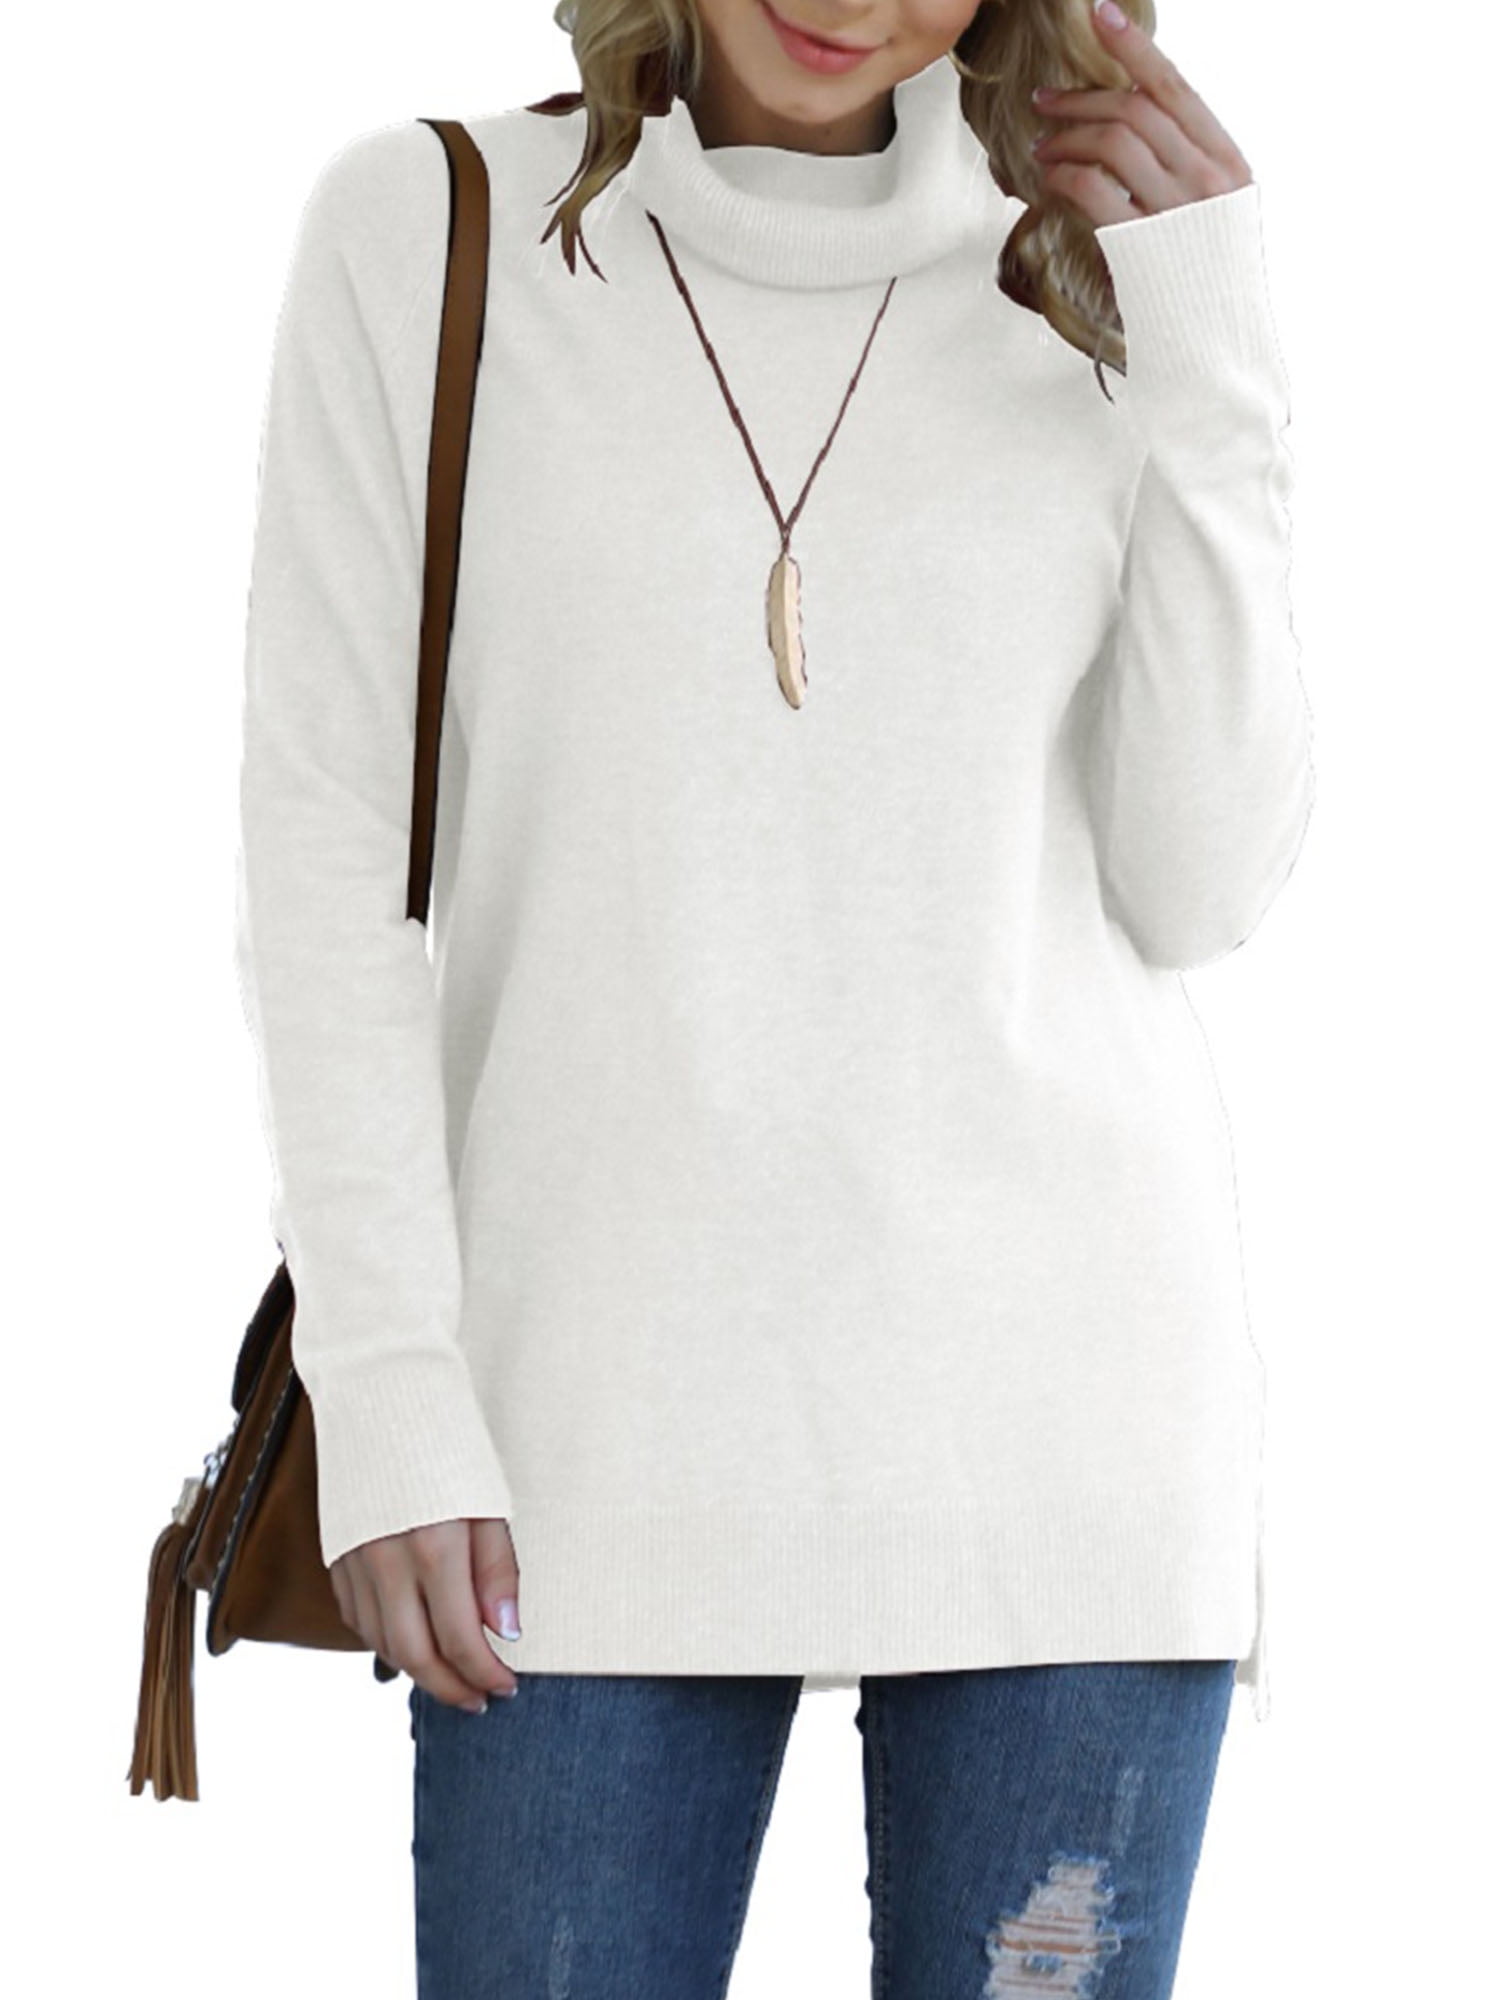 PMUYBHF Female White Sweater Tops for Women Women Winter Fashion Color  Contrast High Neck Sweater Large Pullover Sweater L 